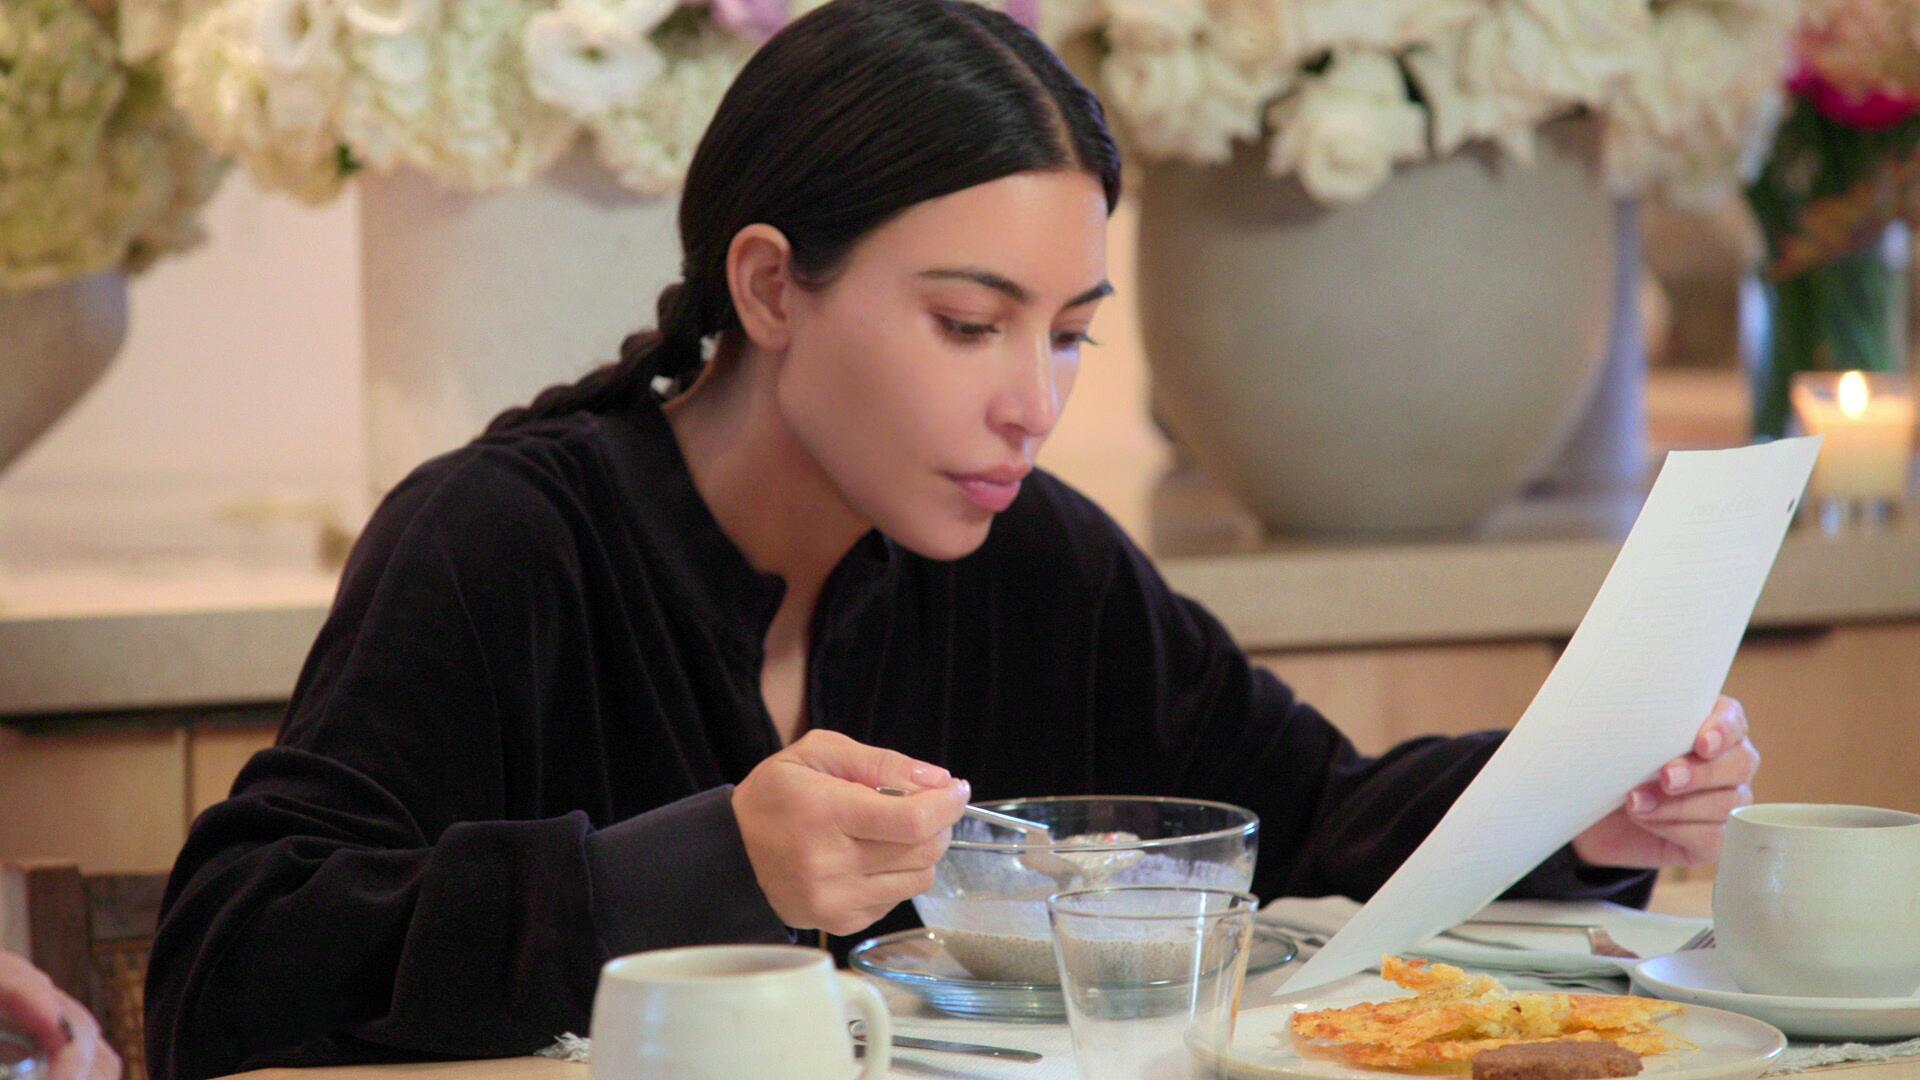 Kim Kardashian wears a black shirt and eats cereal as she prepares for the baby bar in 'The Kardashians' Episode 5 'Who is Kim K?'